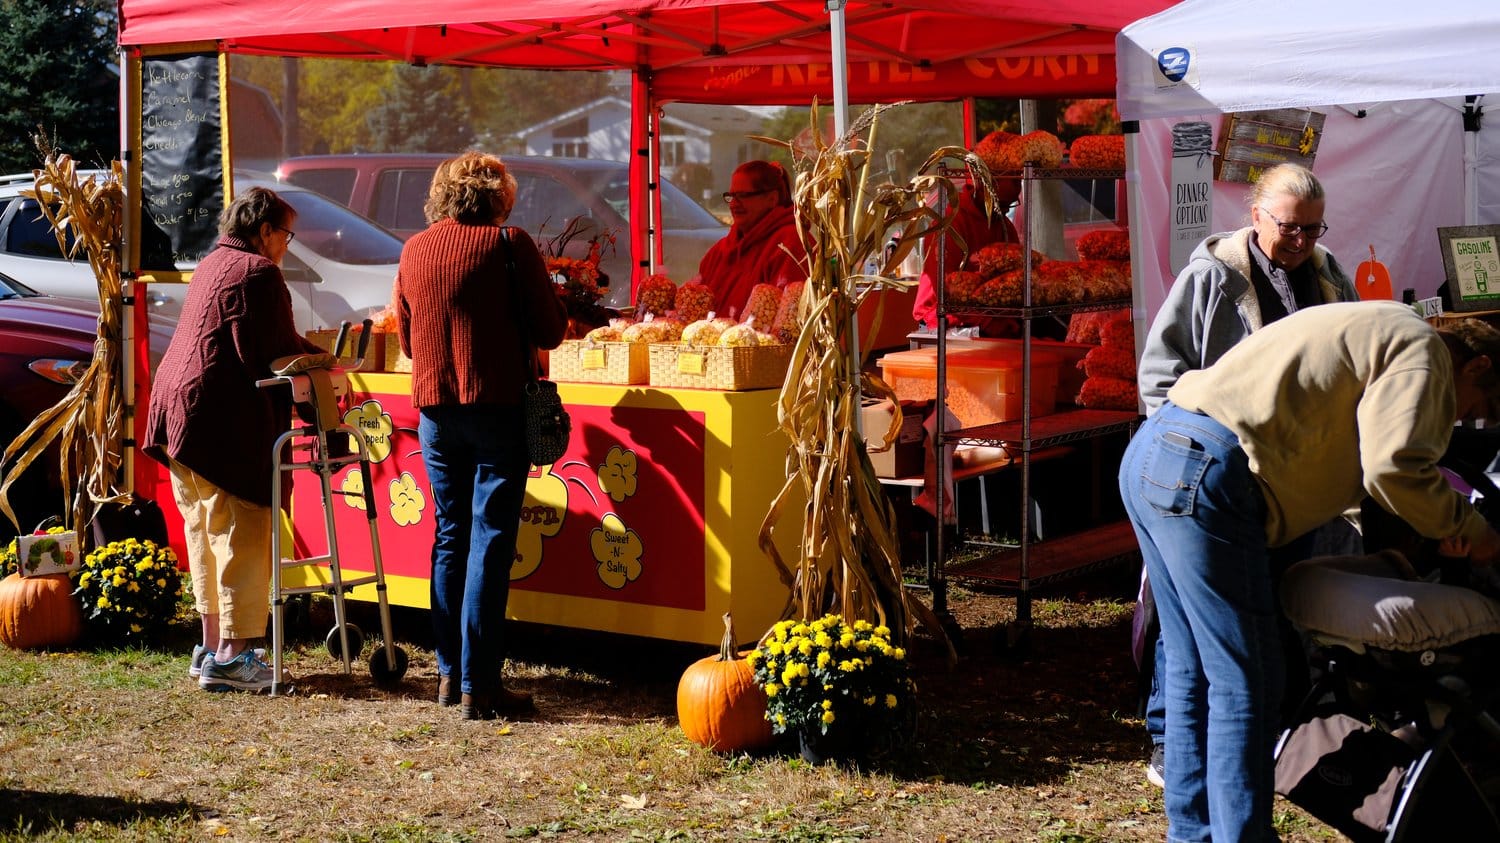 Customers at the kettle corn tent.